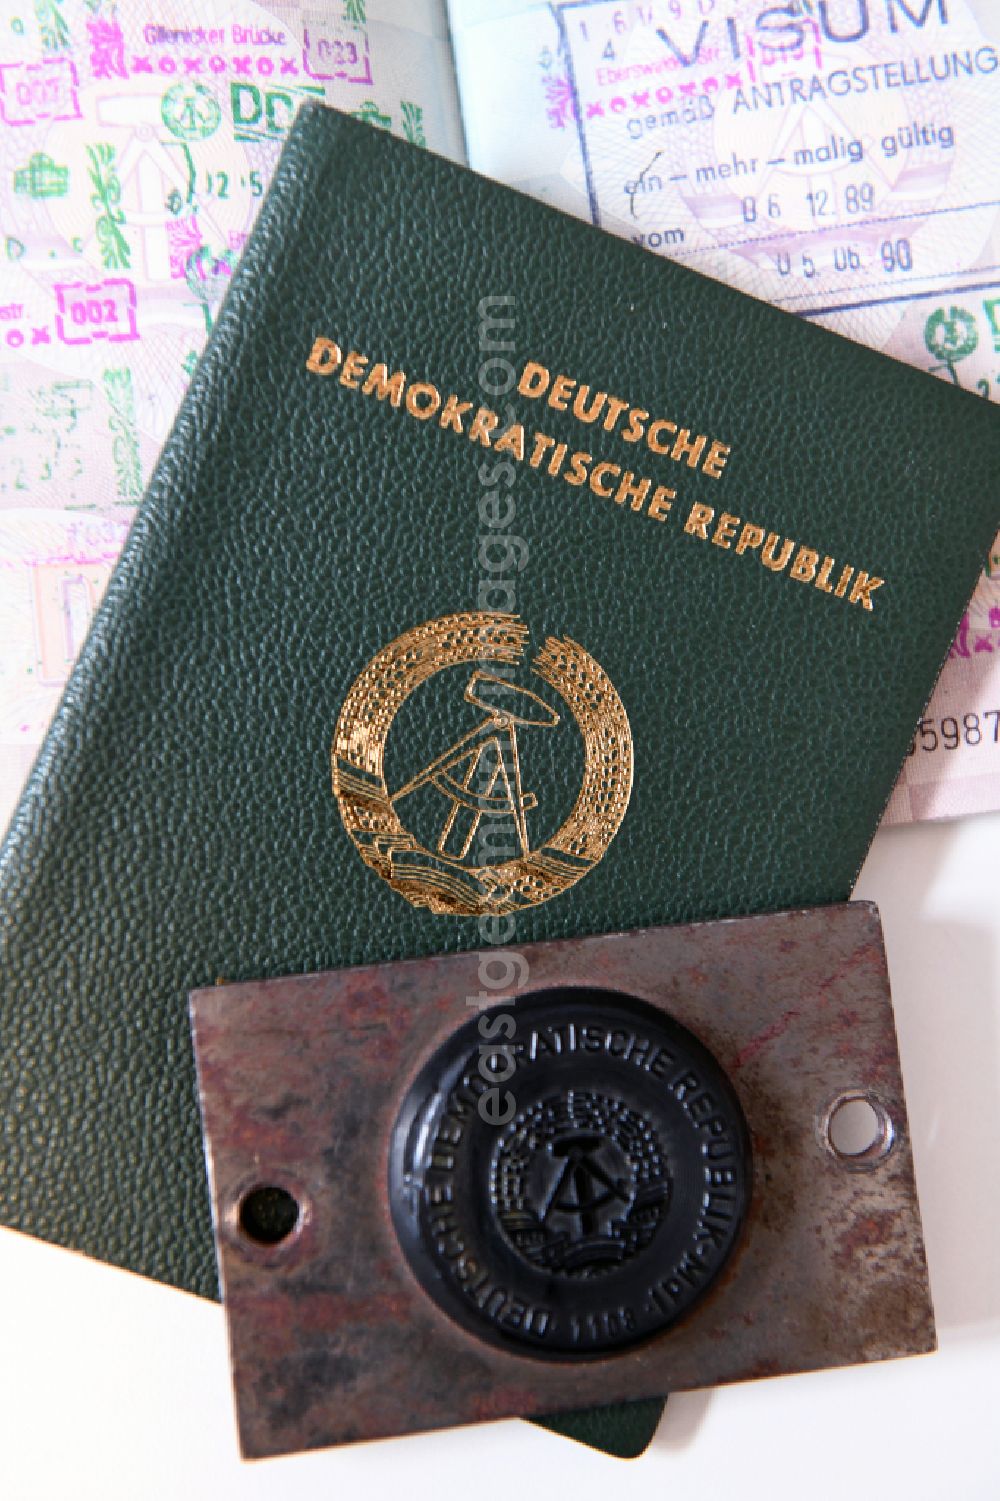 GDR picture archive: Berlin - A passport of the German Democratic Republic and a seal of the Ministry of the Interior (MDI) from the GDR